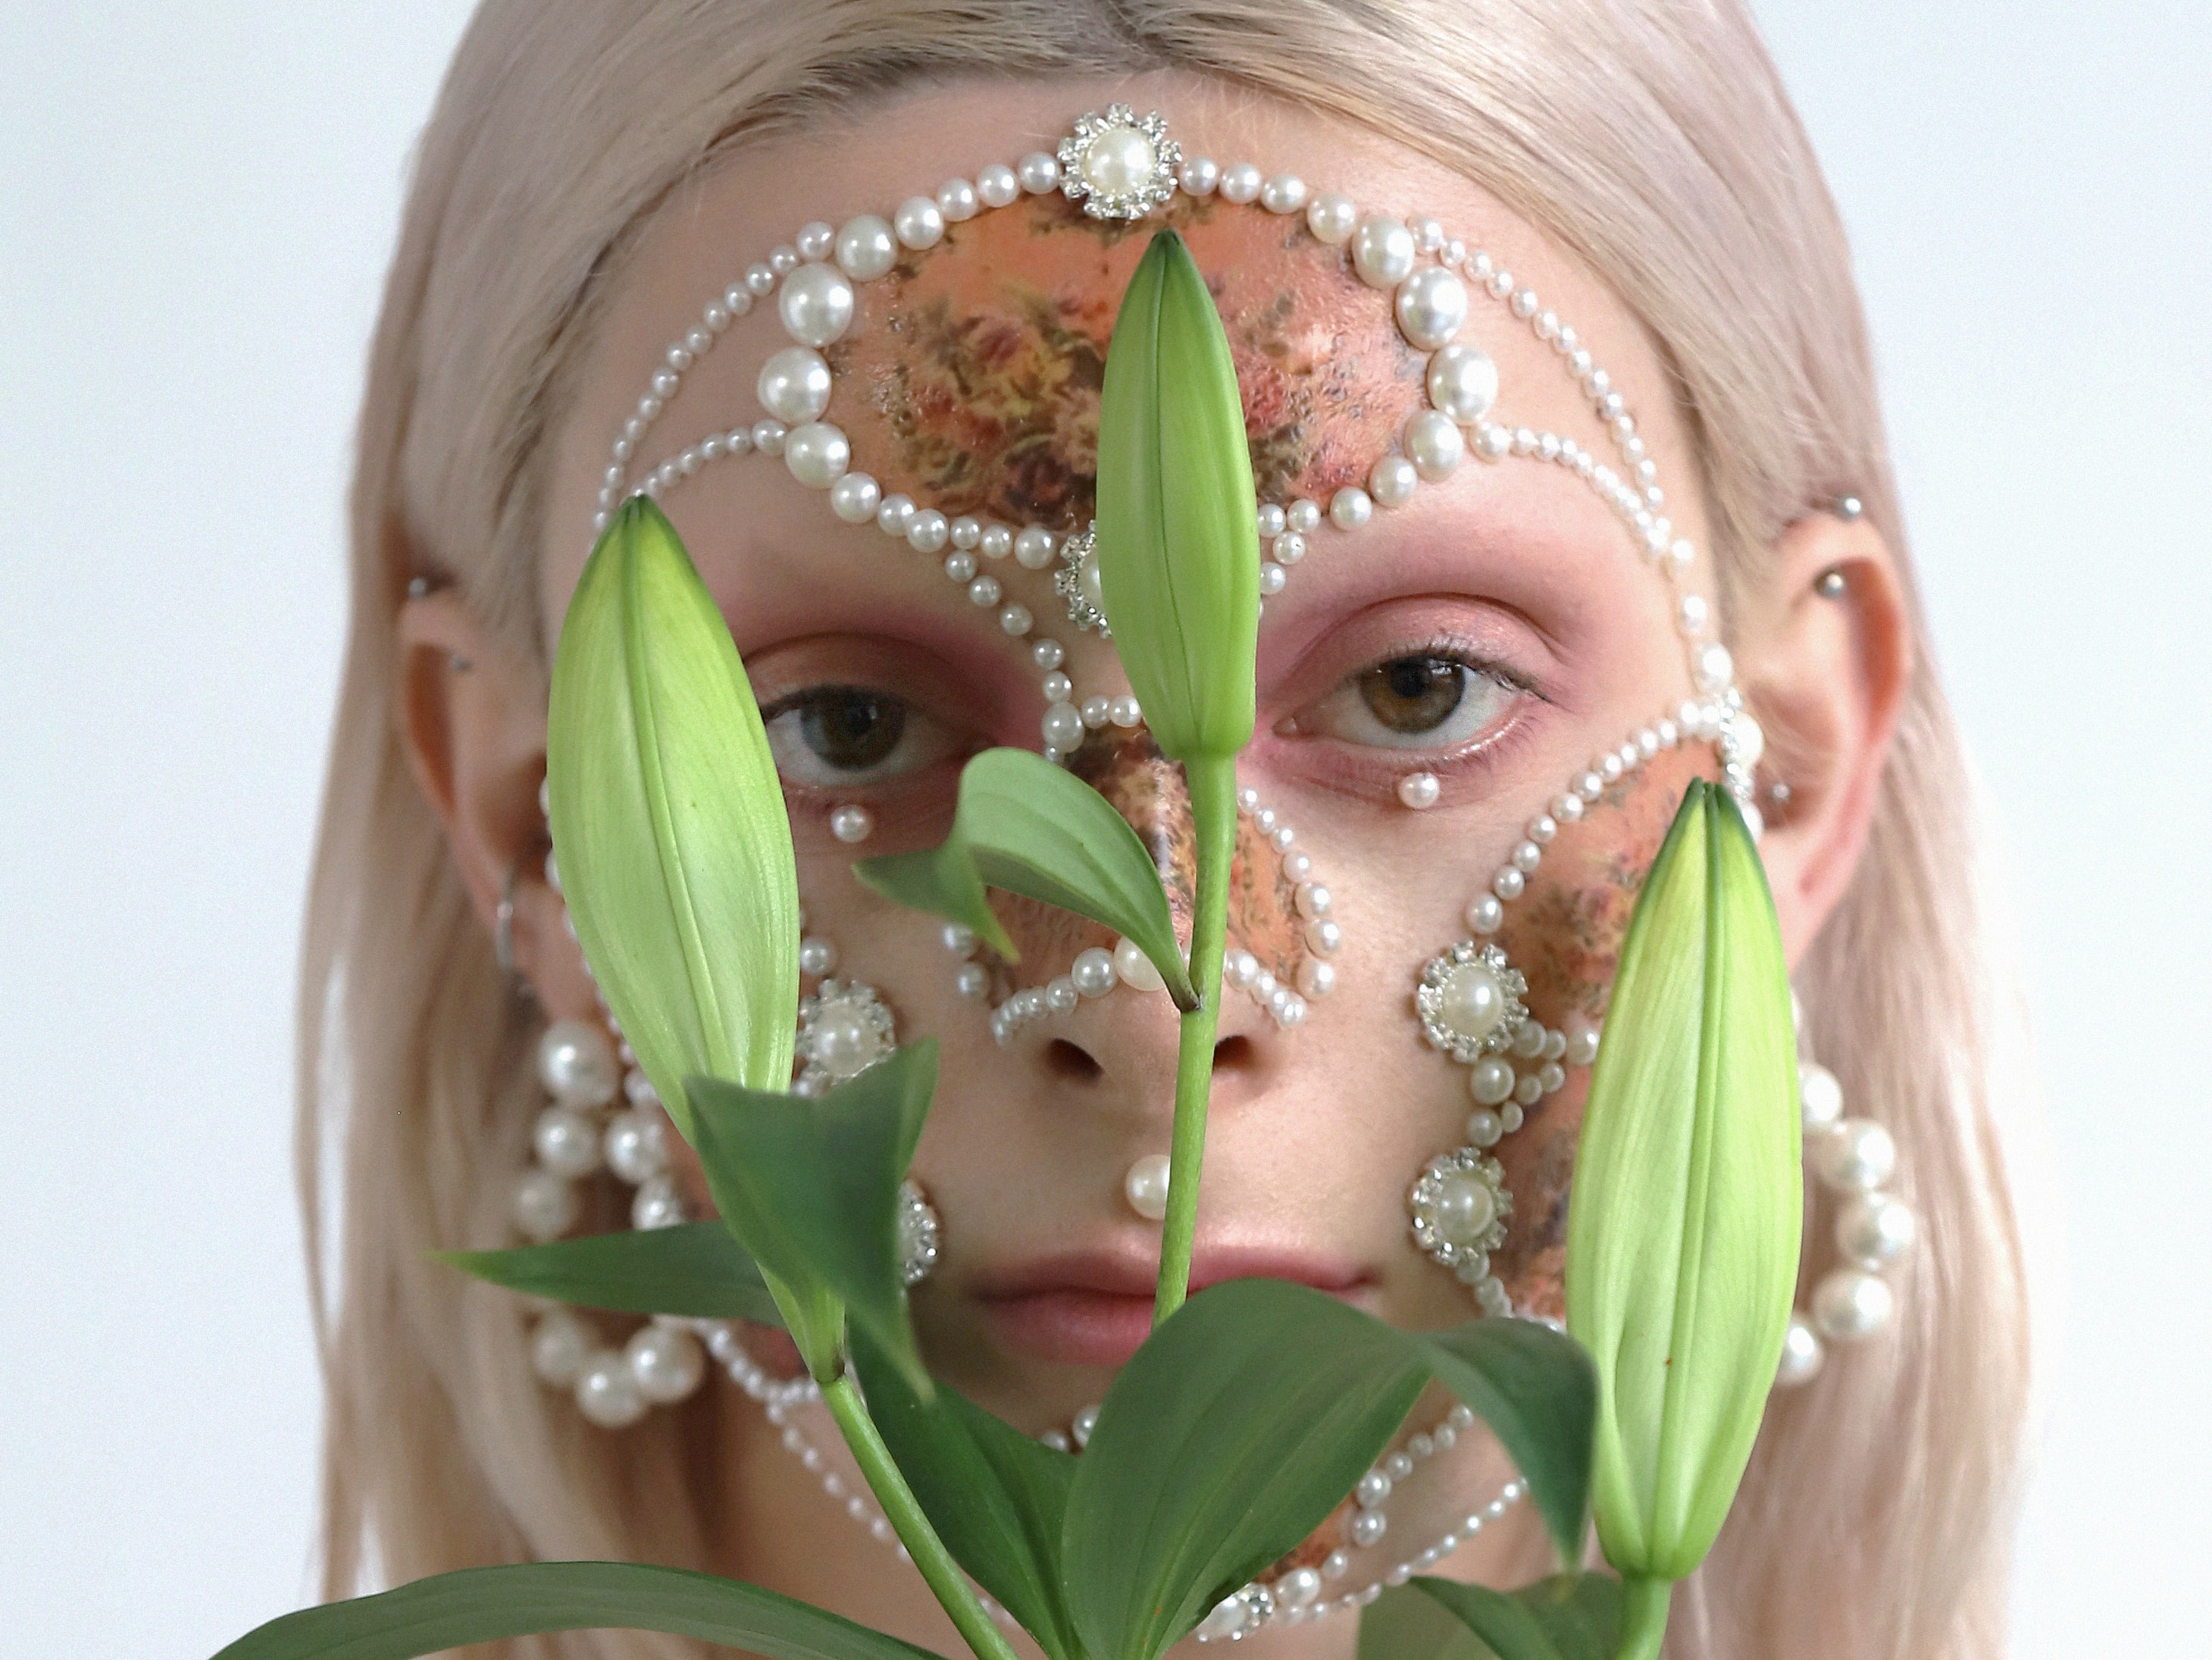 Female model with pearl facial jewellery, makeup and lilies.